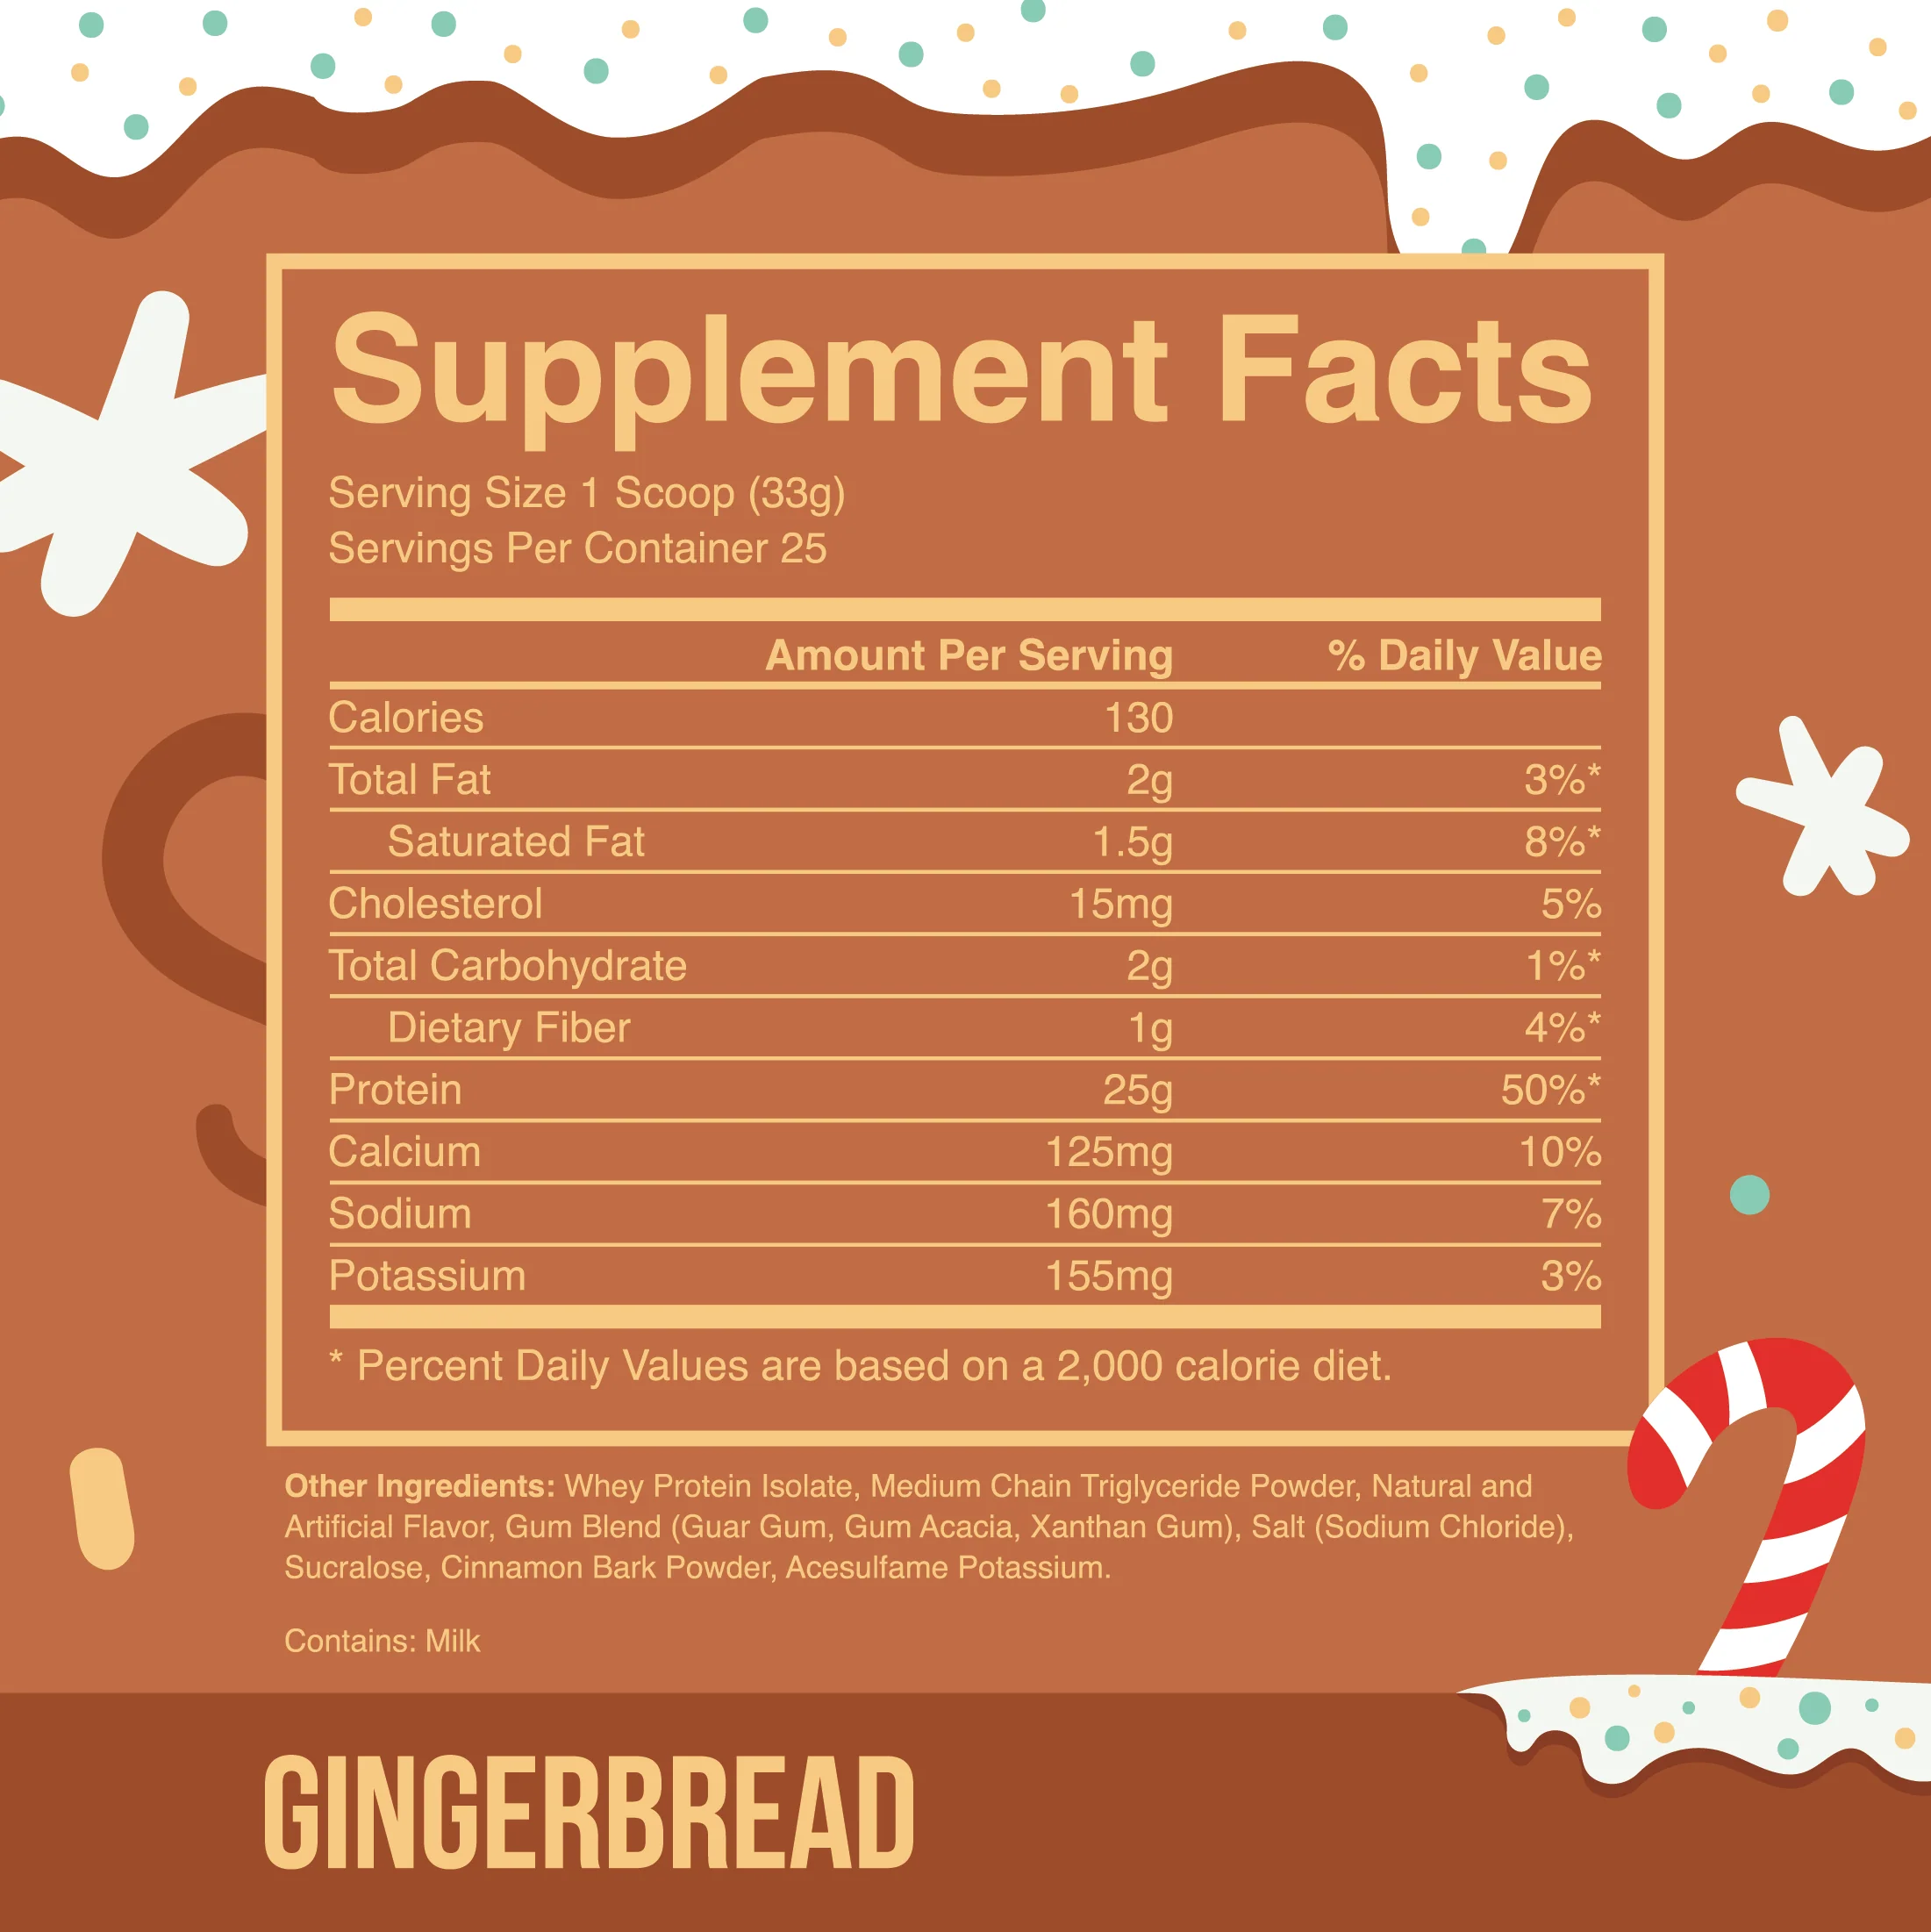 RAW Nutrition Gingerbread Itholate Protein Ingredients